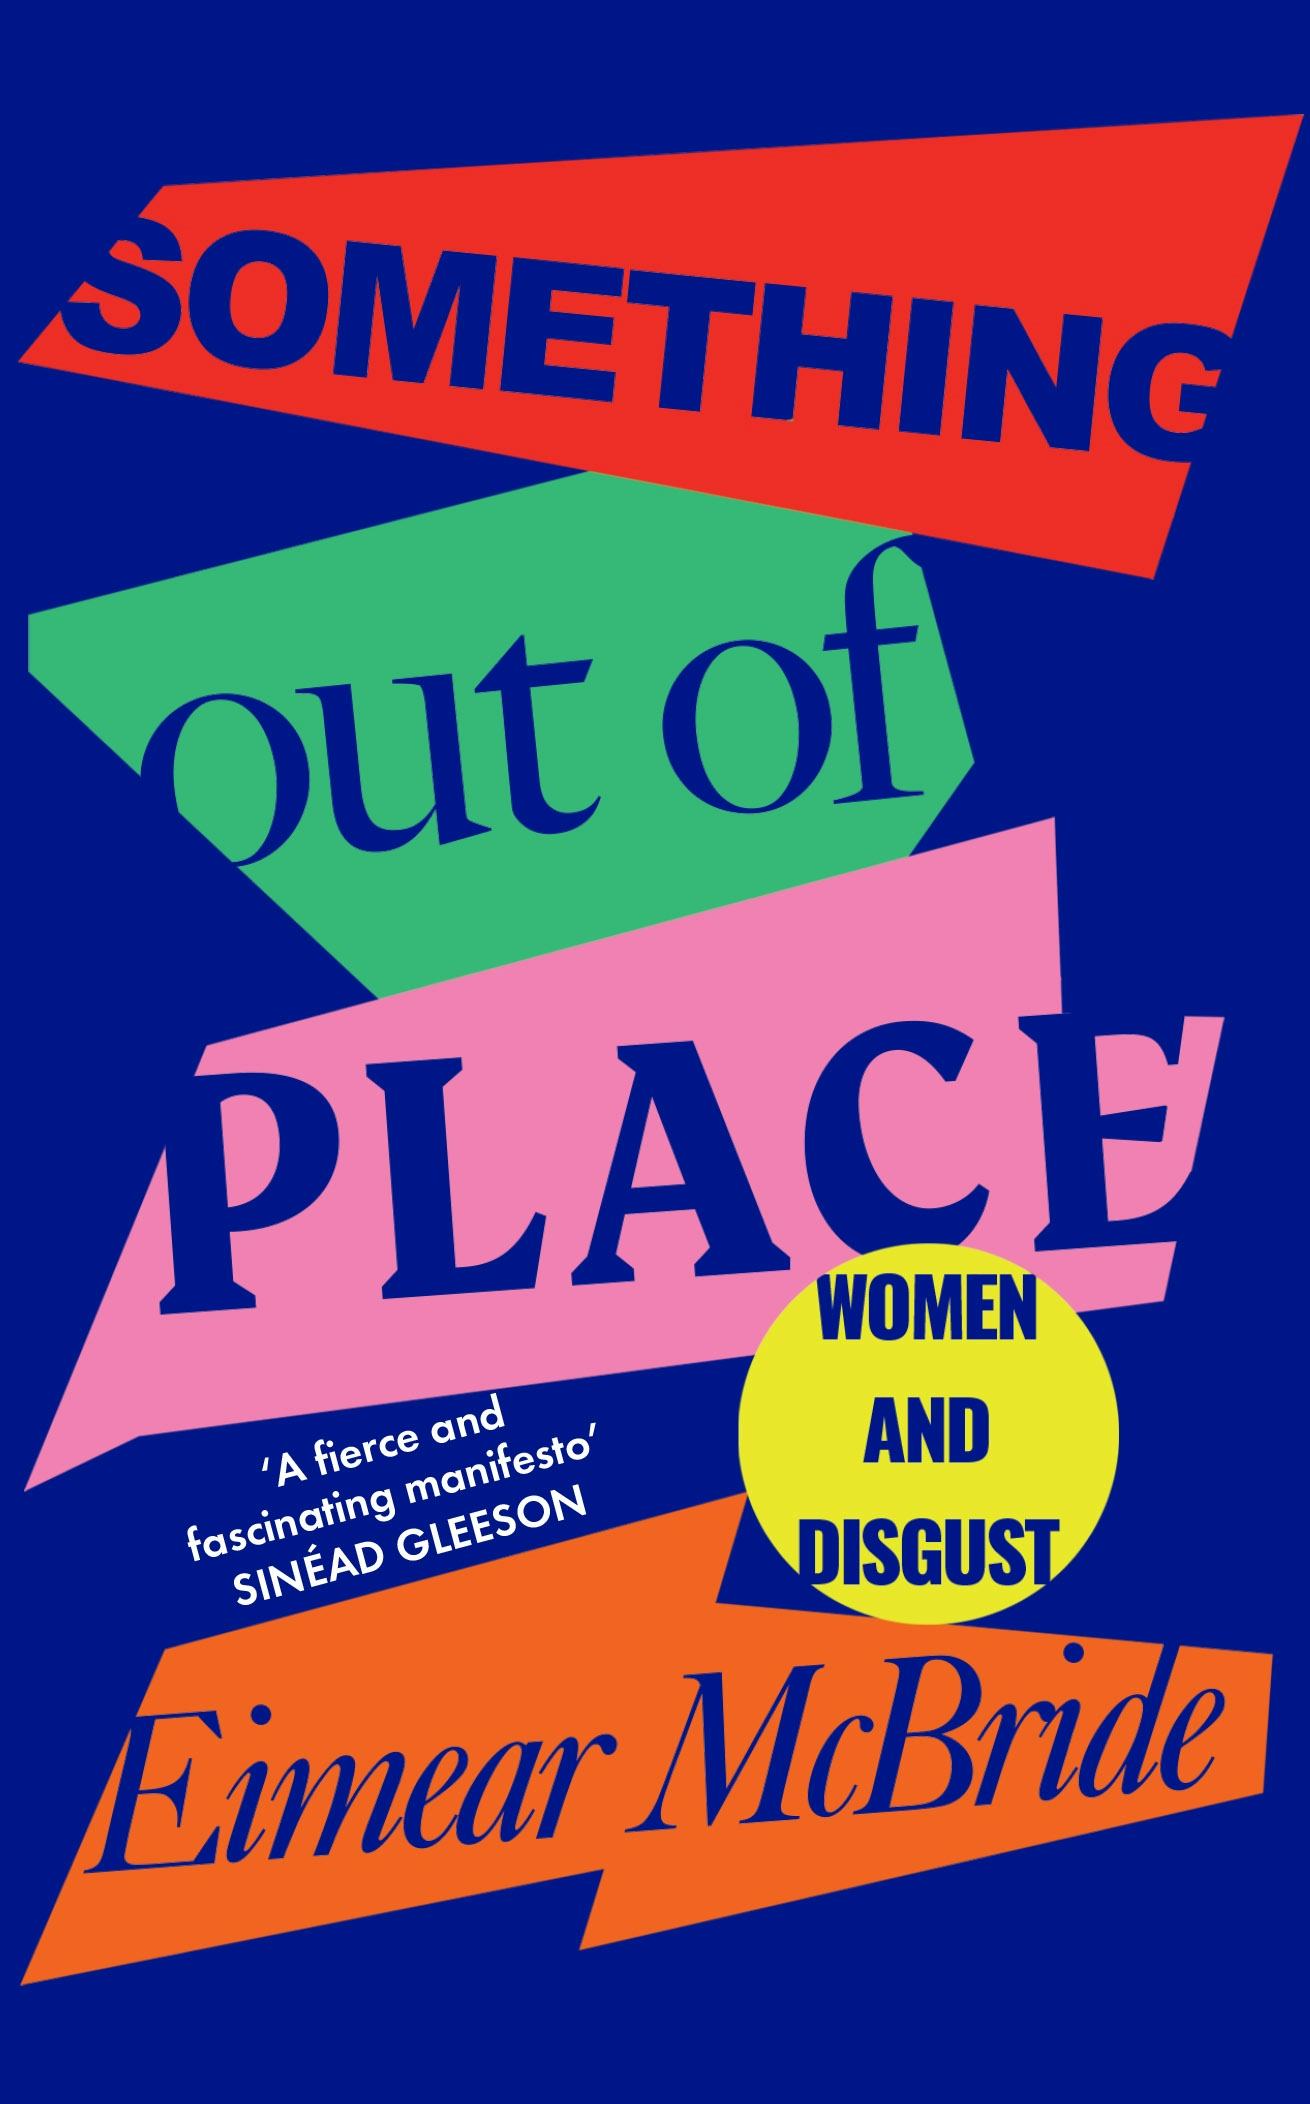 Book cover for the paperback edition of 'Something Out of Place' by Eimear McBride